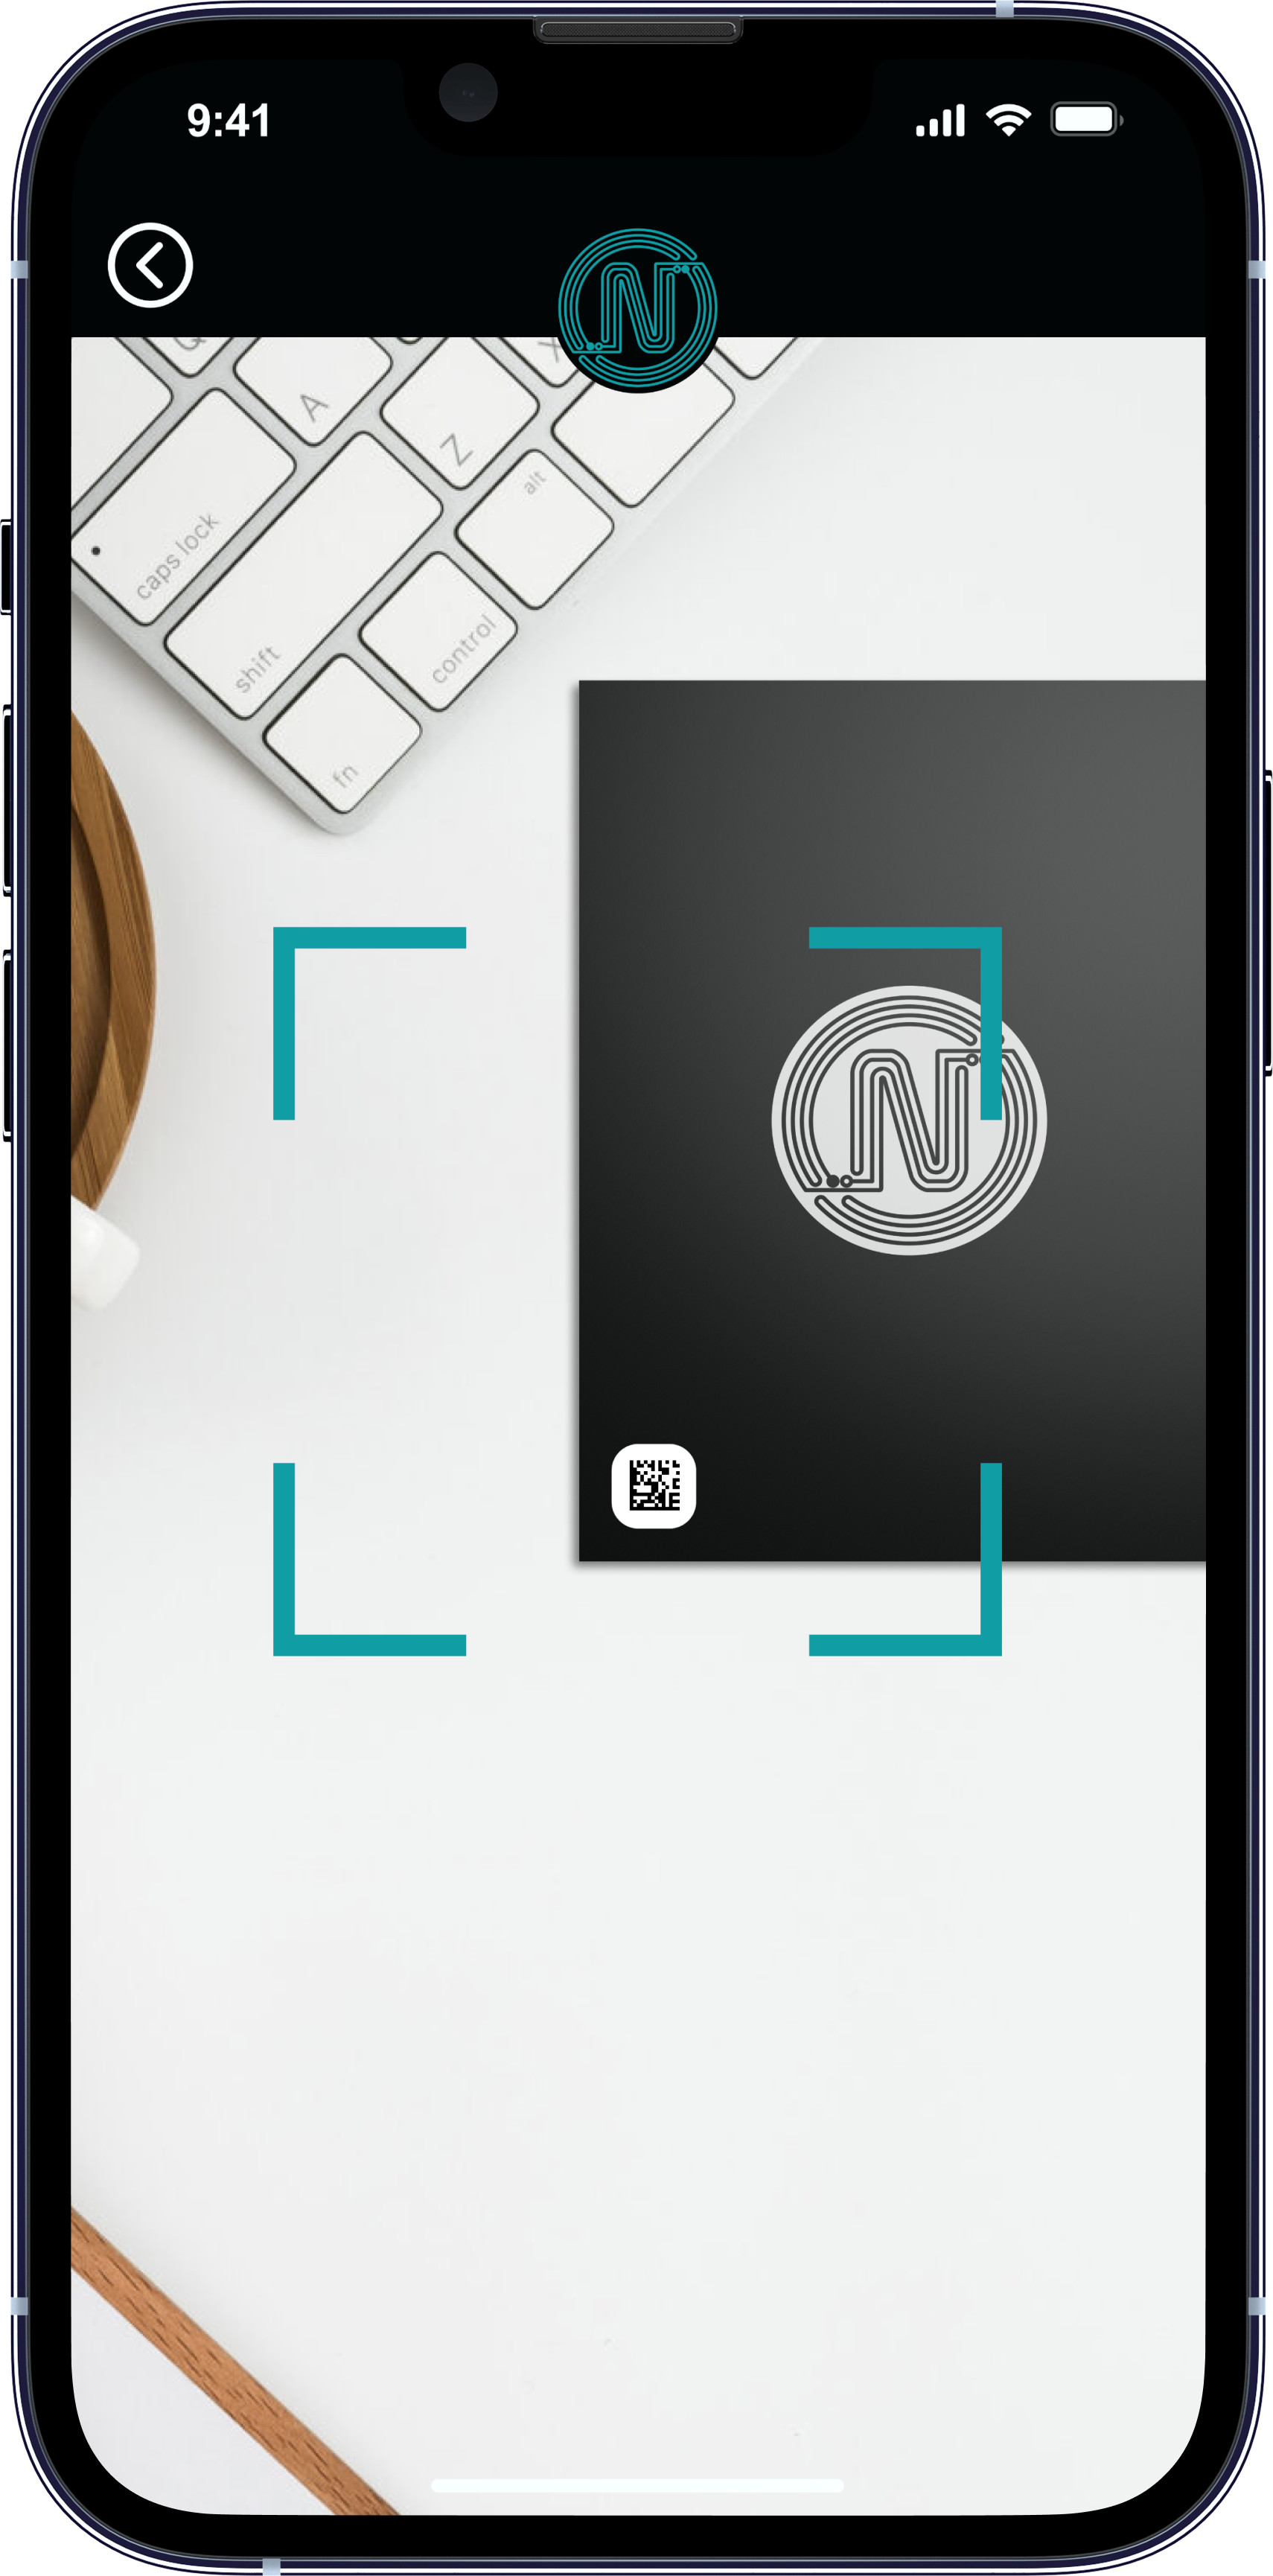 Activate your Nell Tag in seconds with the in-app scanner.Image